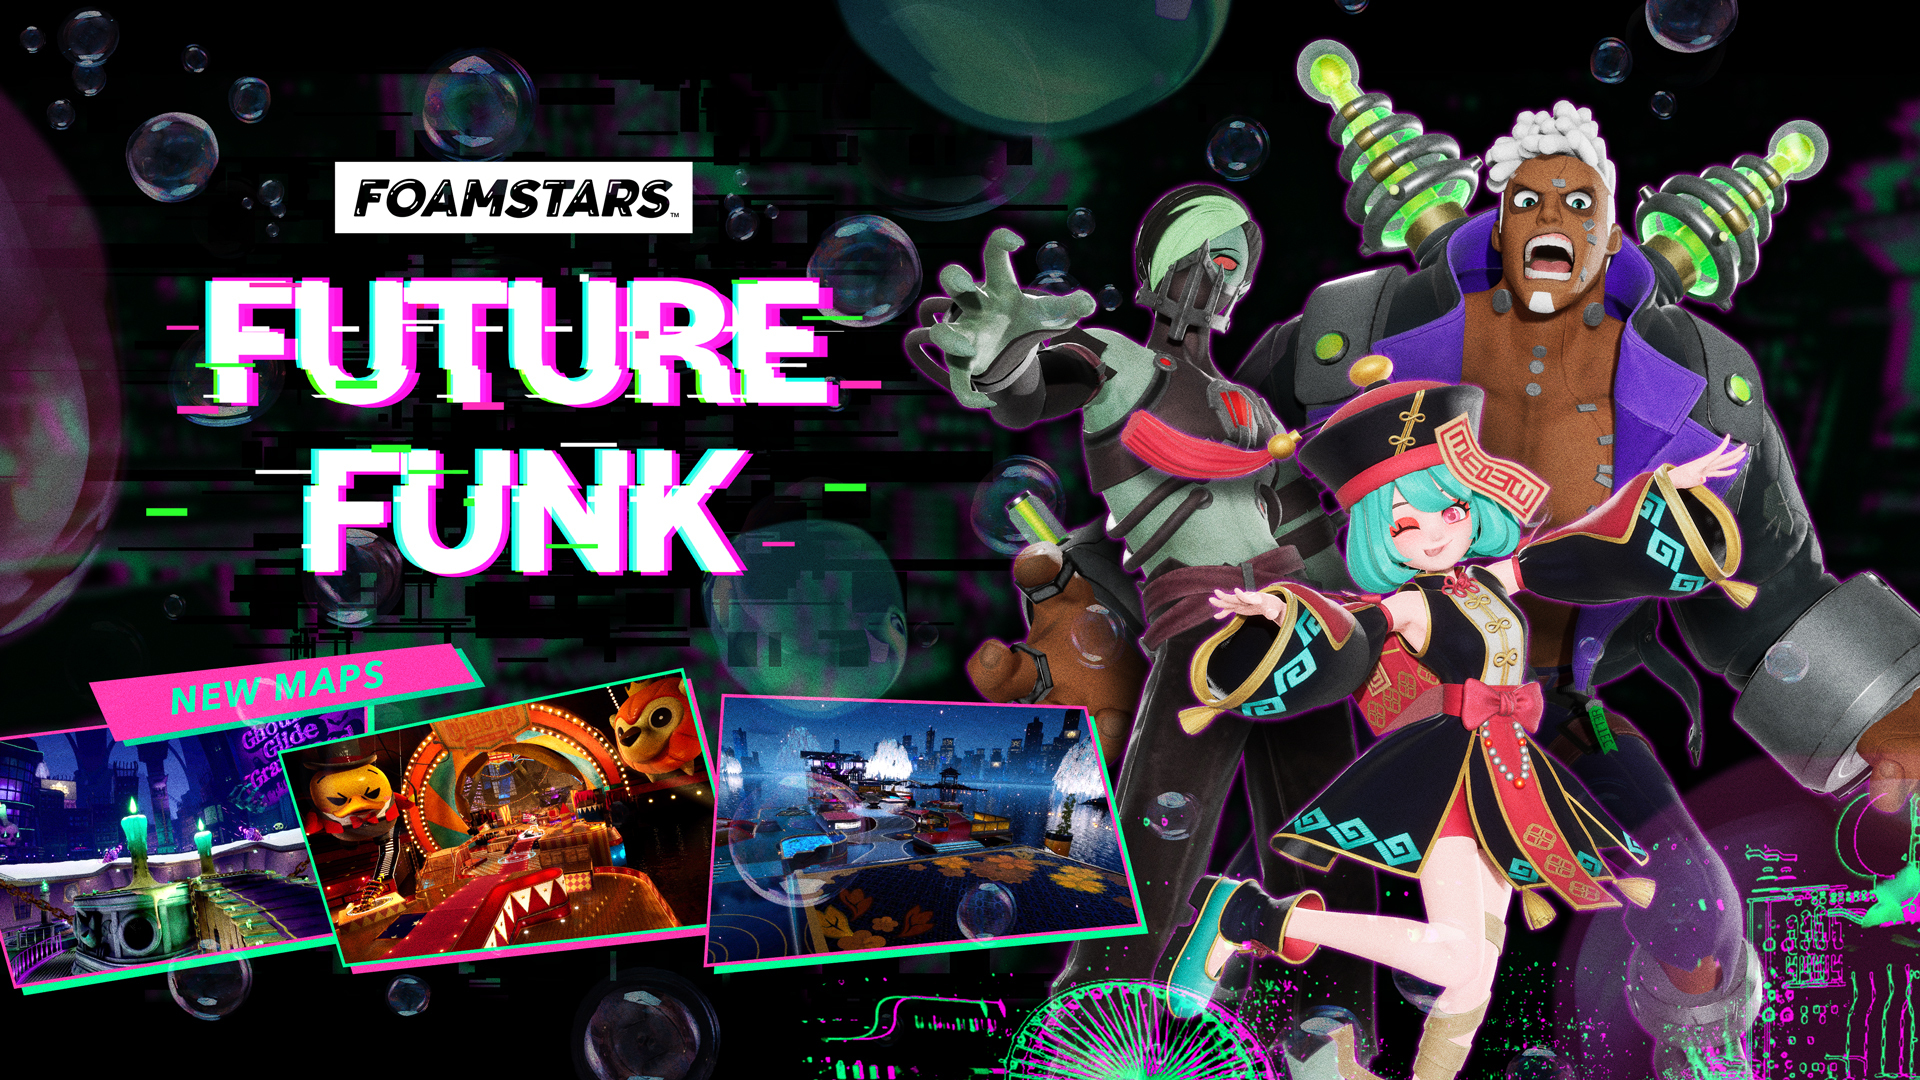 Season 4: Future Funk at Foamstars will be launched on 16 May